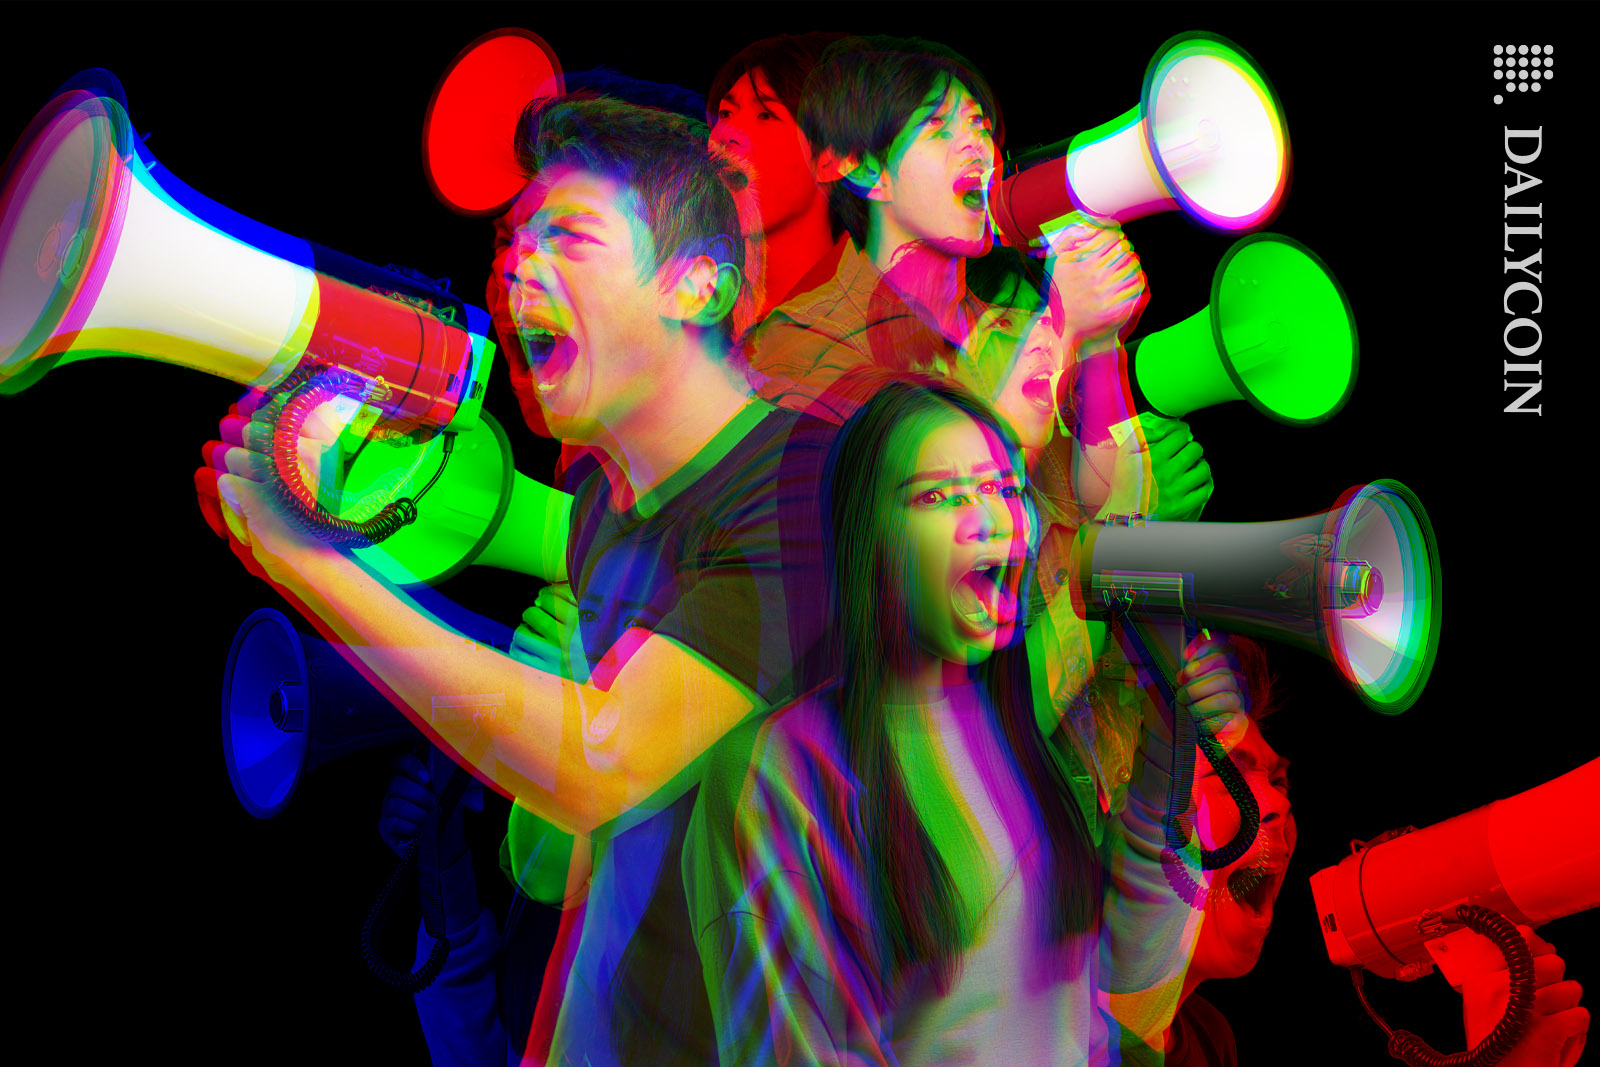 A goup of young people shouthing through loud speakers in a RGB split composition.